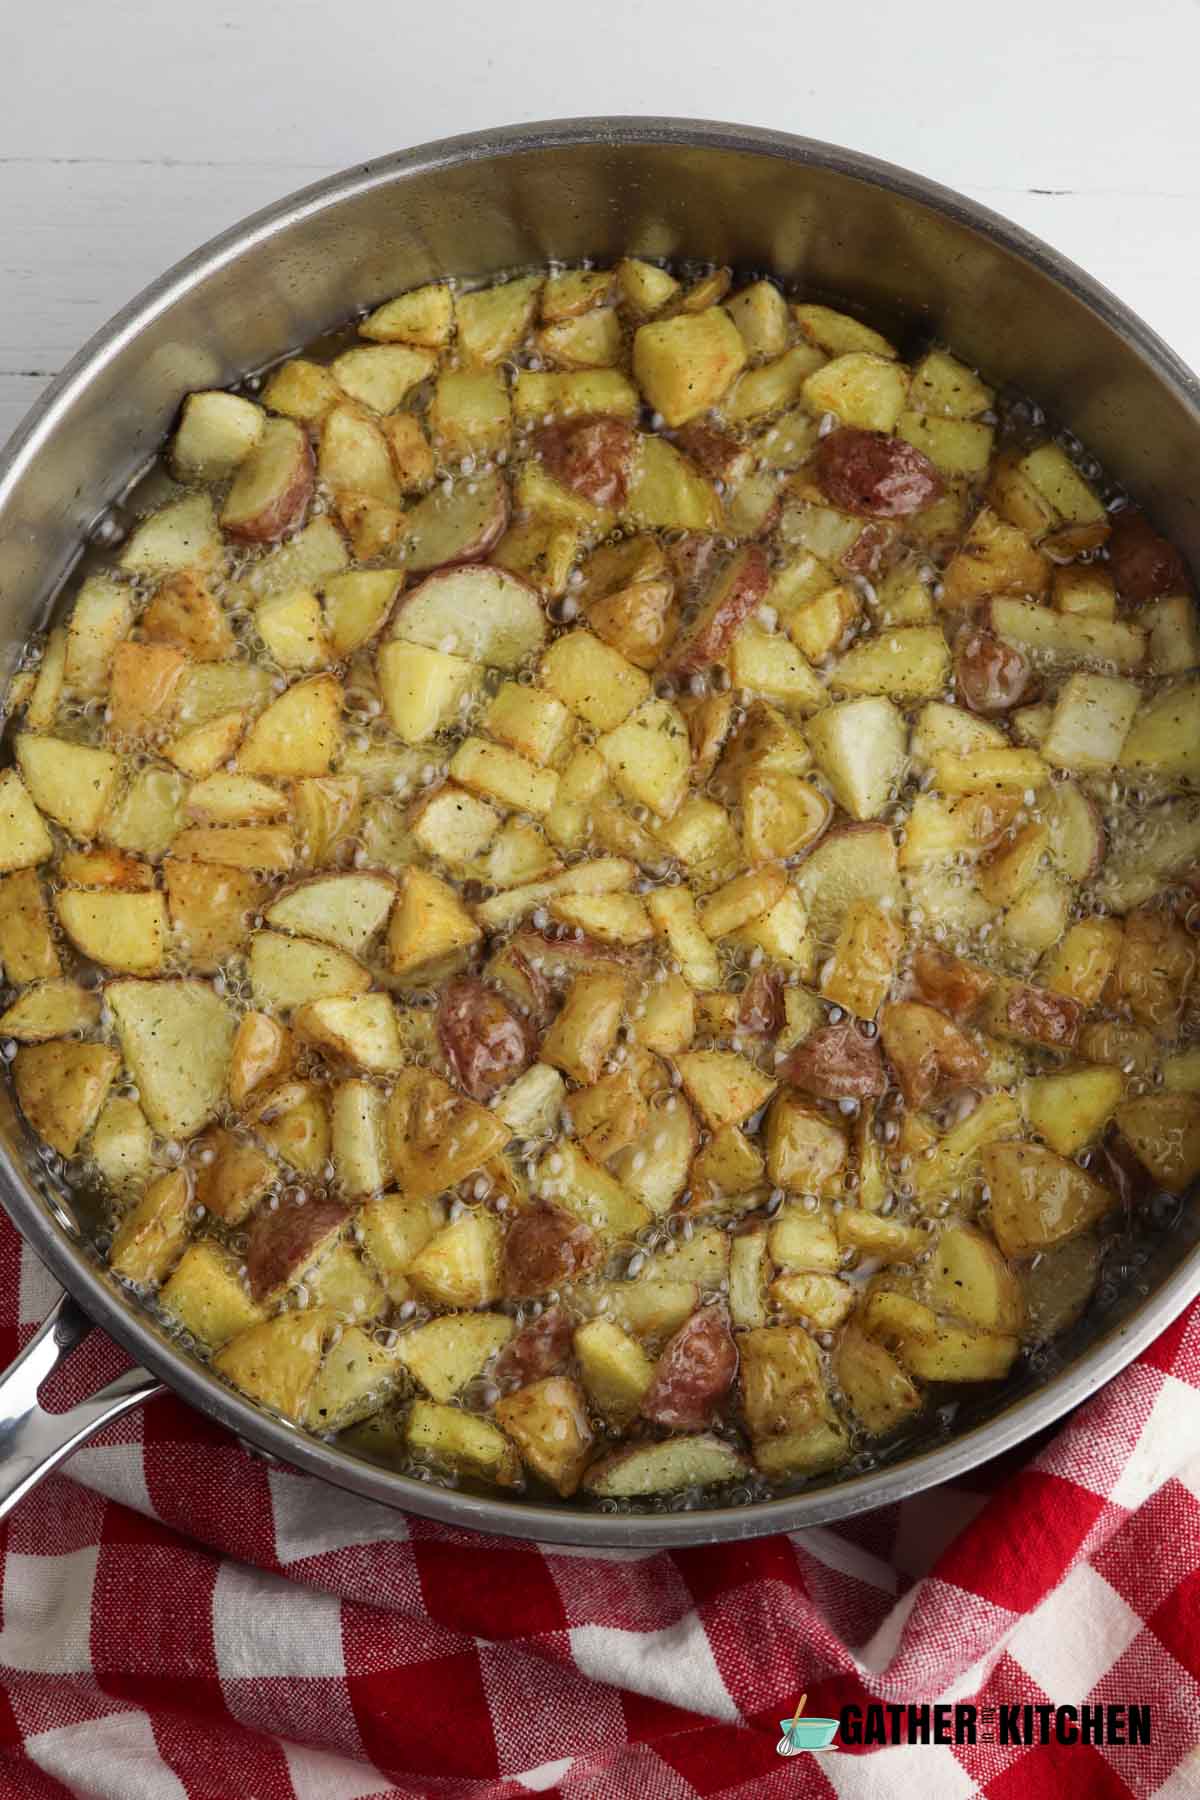 Oil boiling with potatoes and seasoning in it.